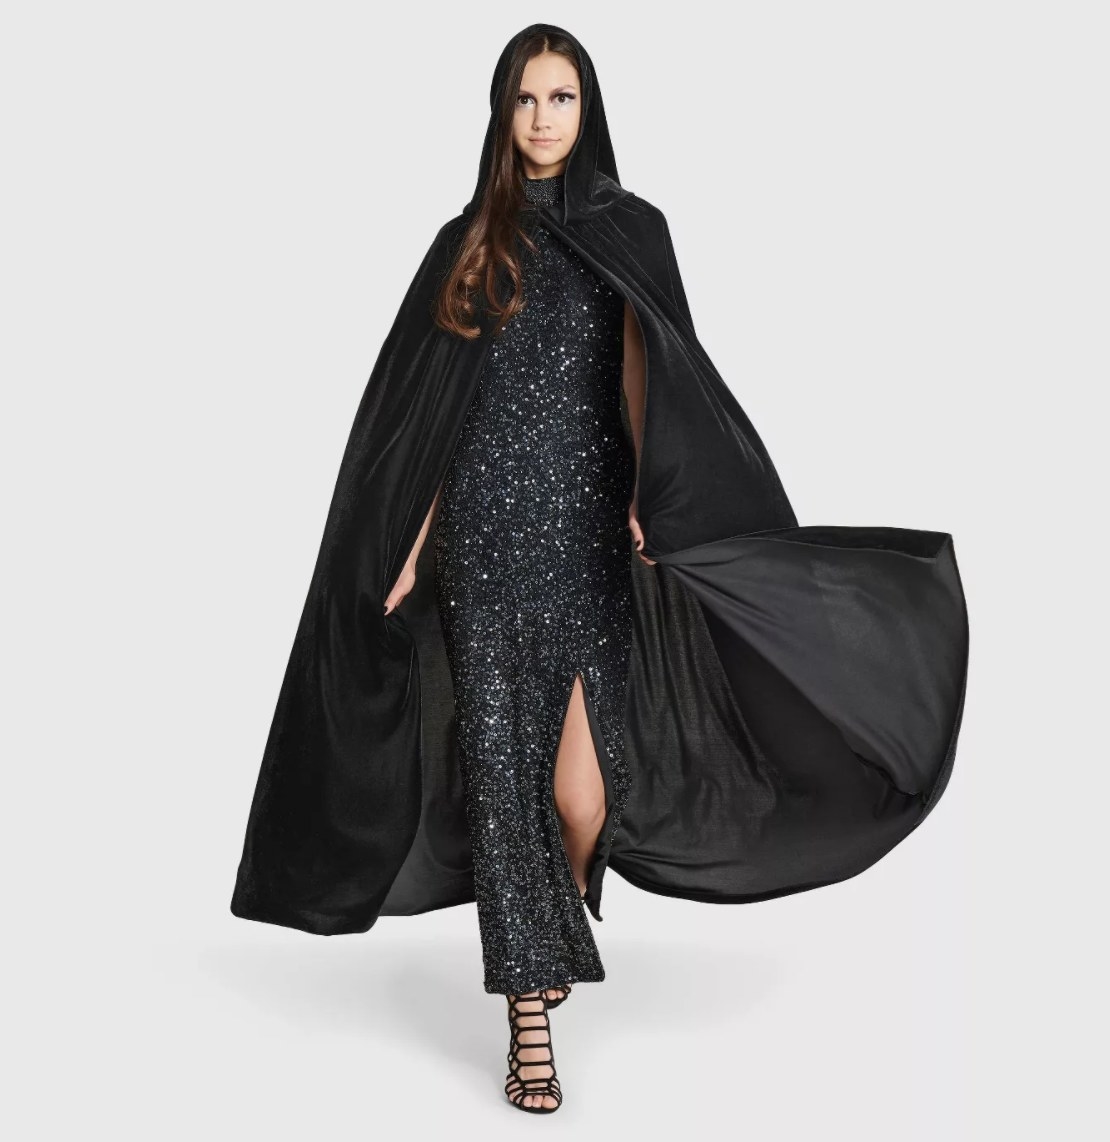 An adult in a floor-length black sparkle dress and black sandals wears the large black cape with the hood up